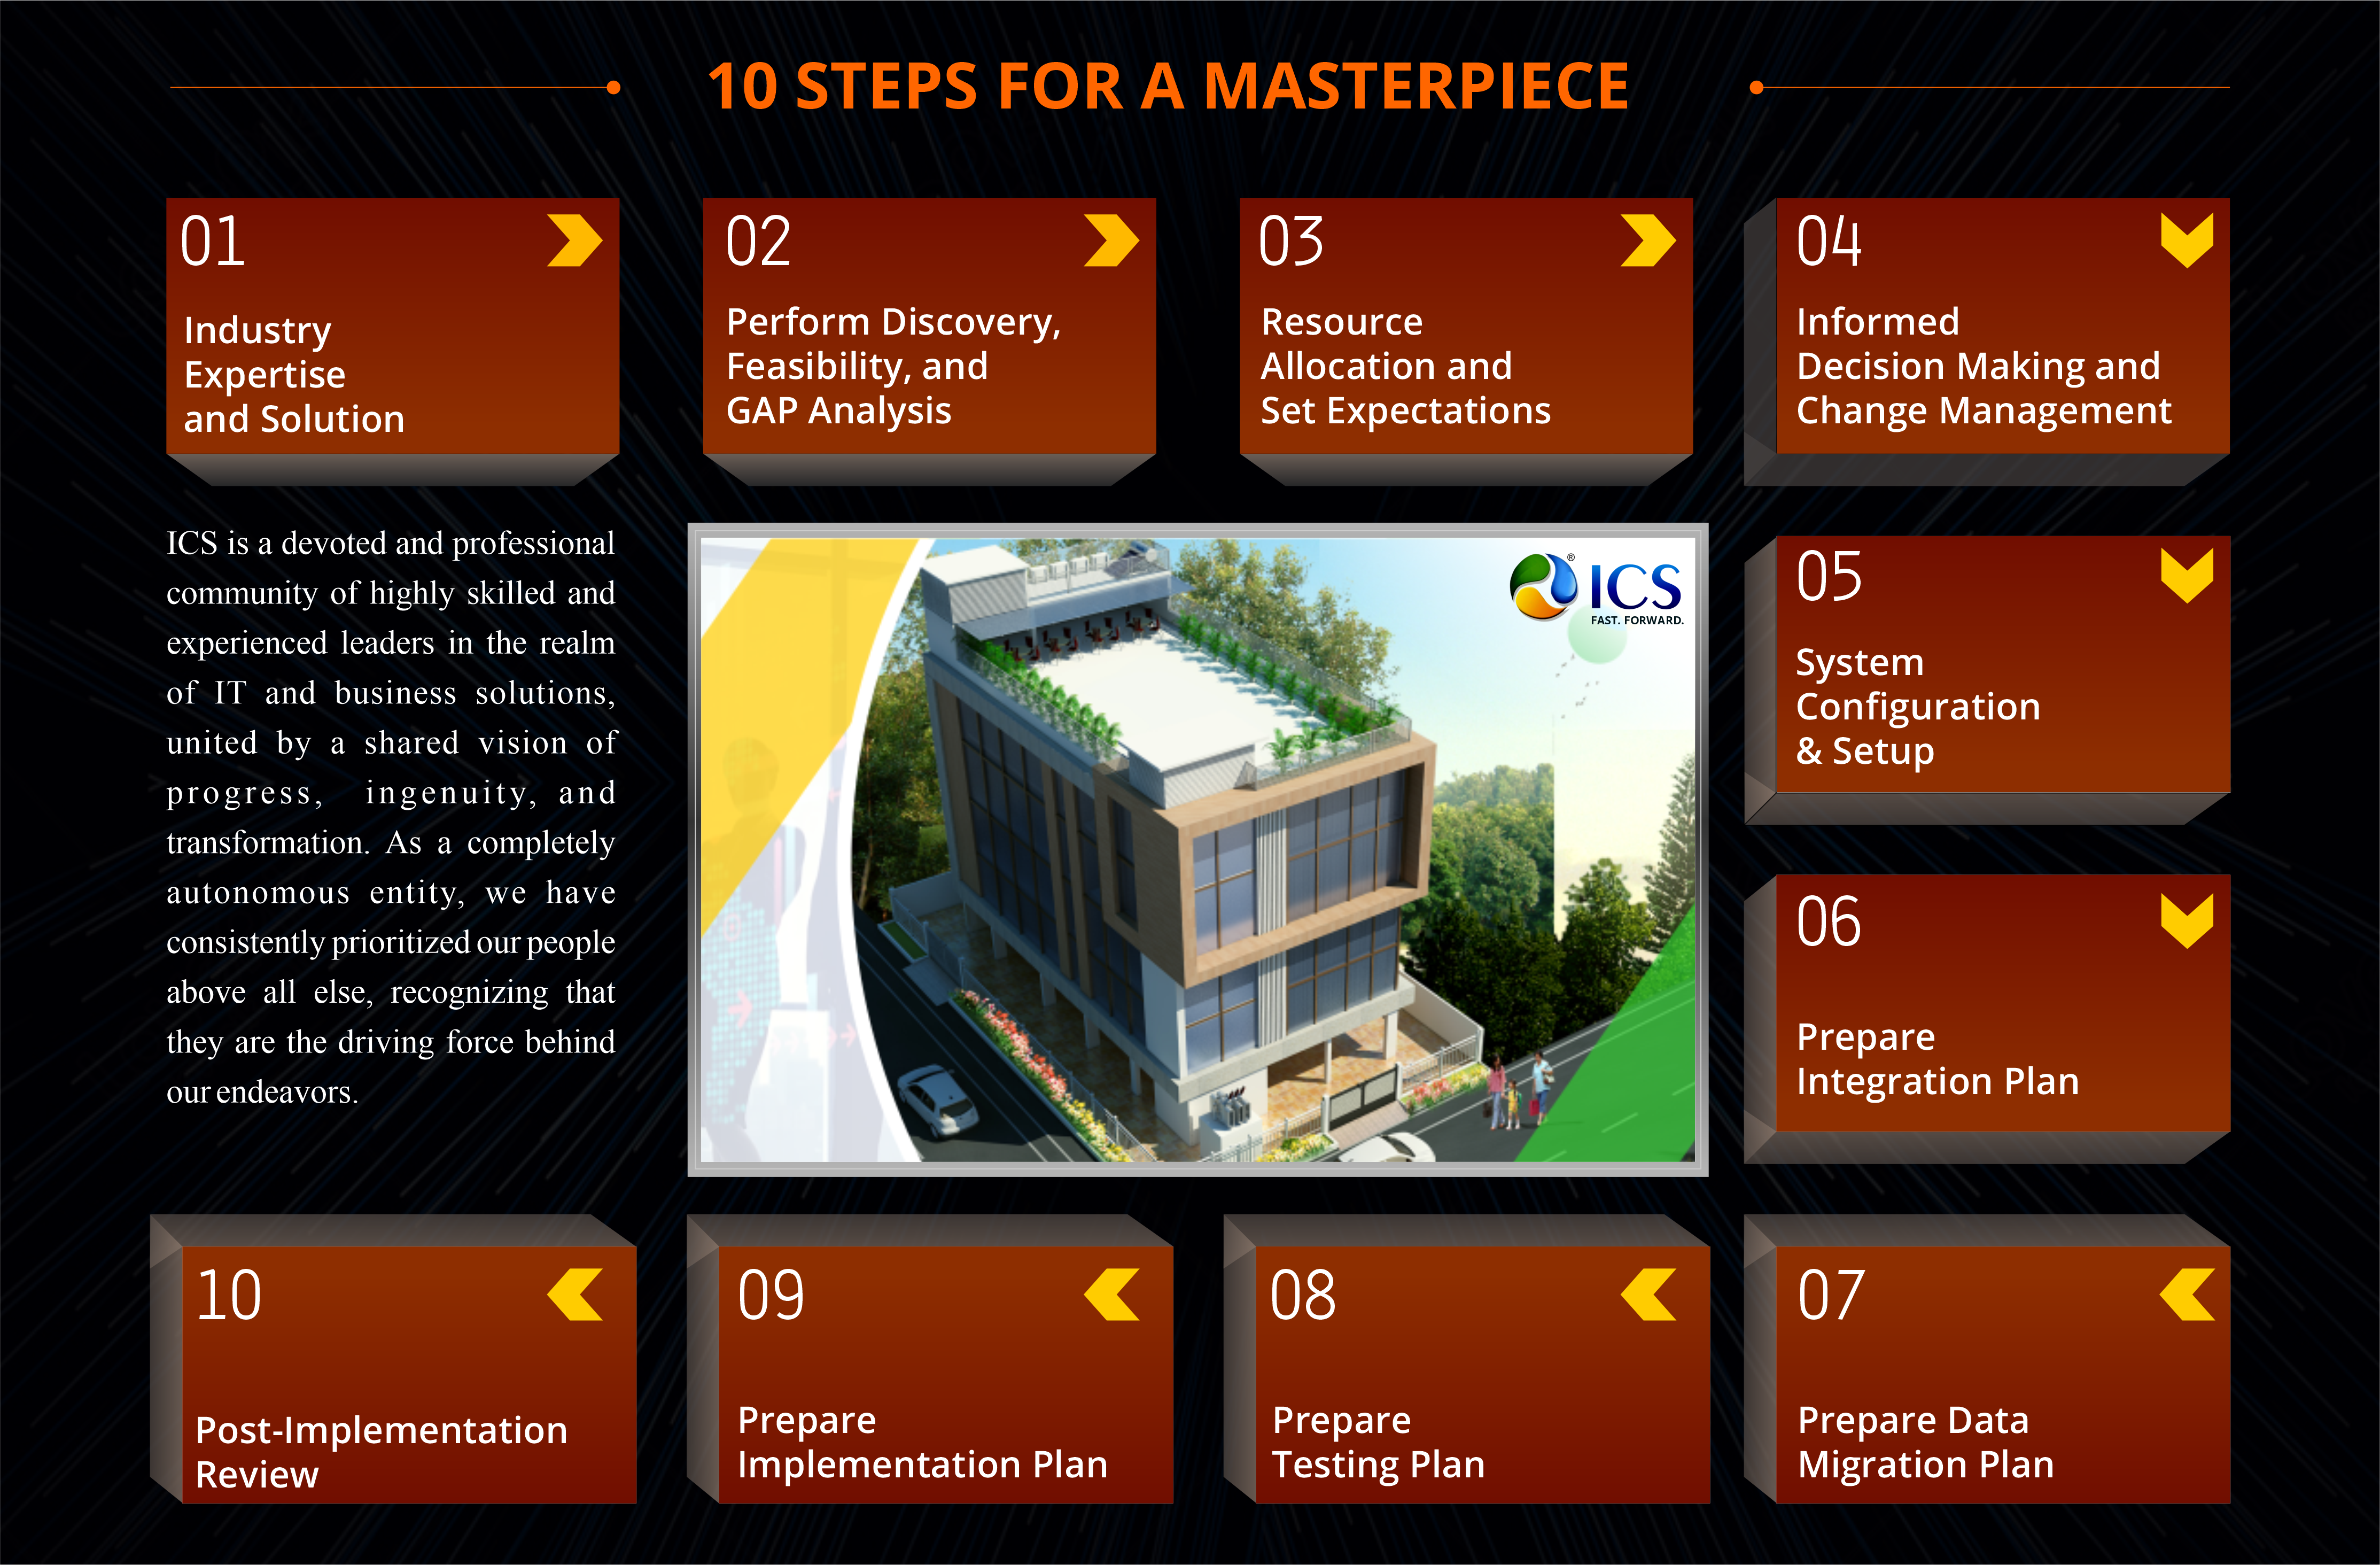 10 steps for a Masterpiece